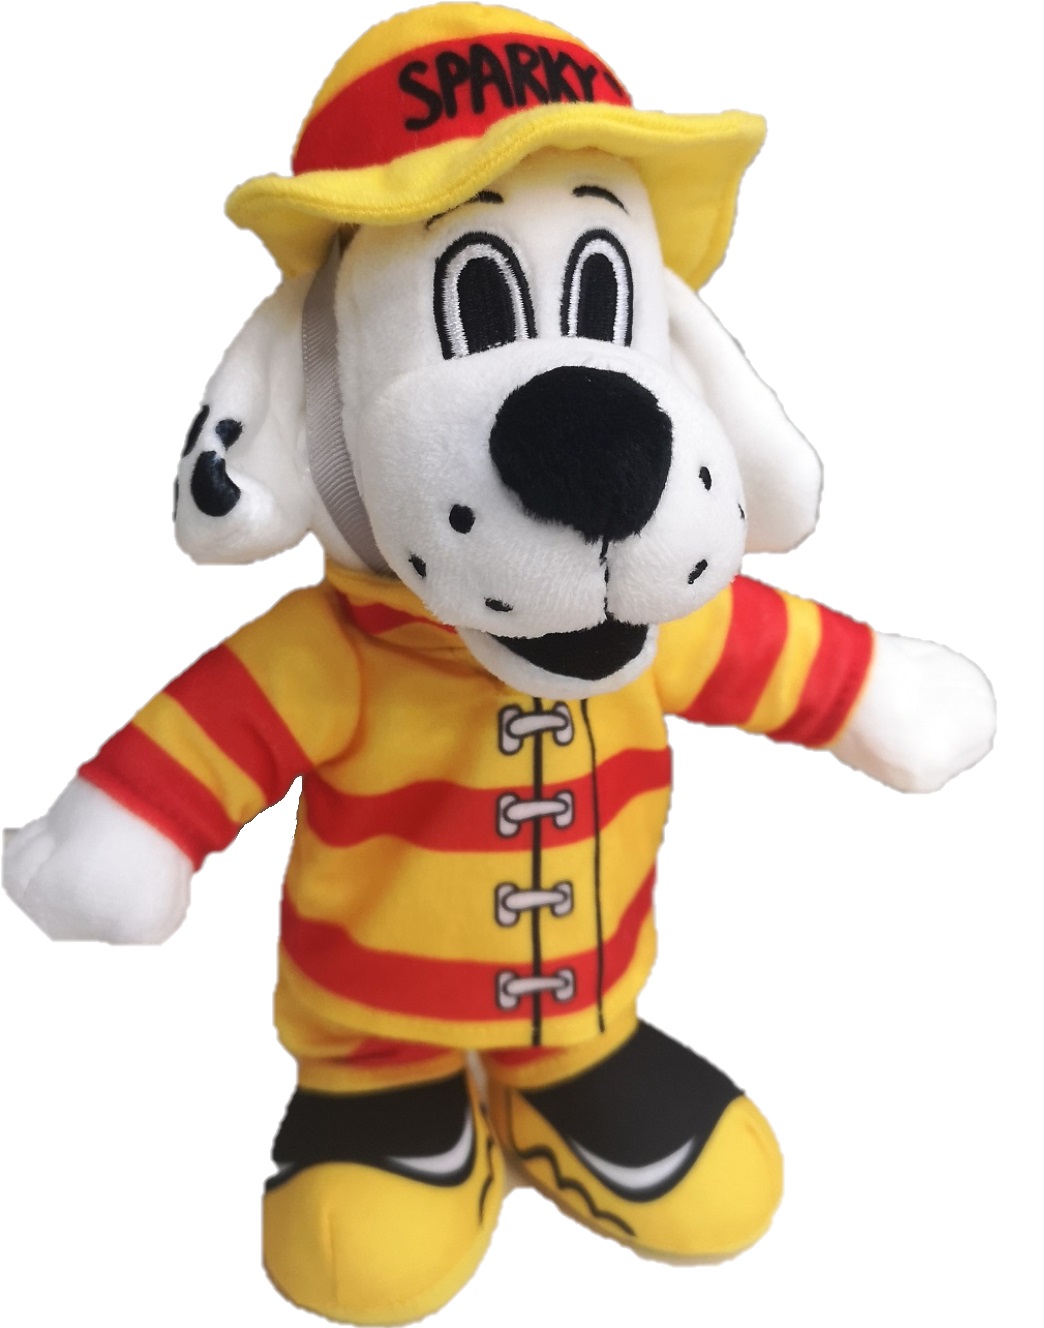 Sparky The Fire Dog Stuffy Firehall Bookstore